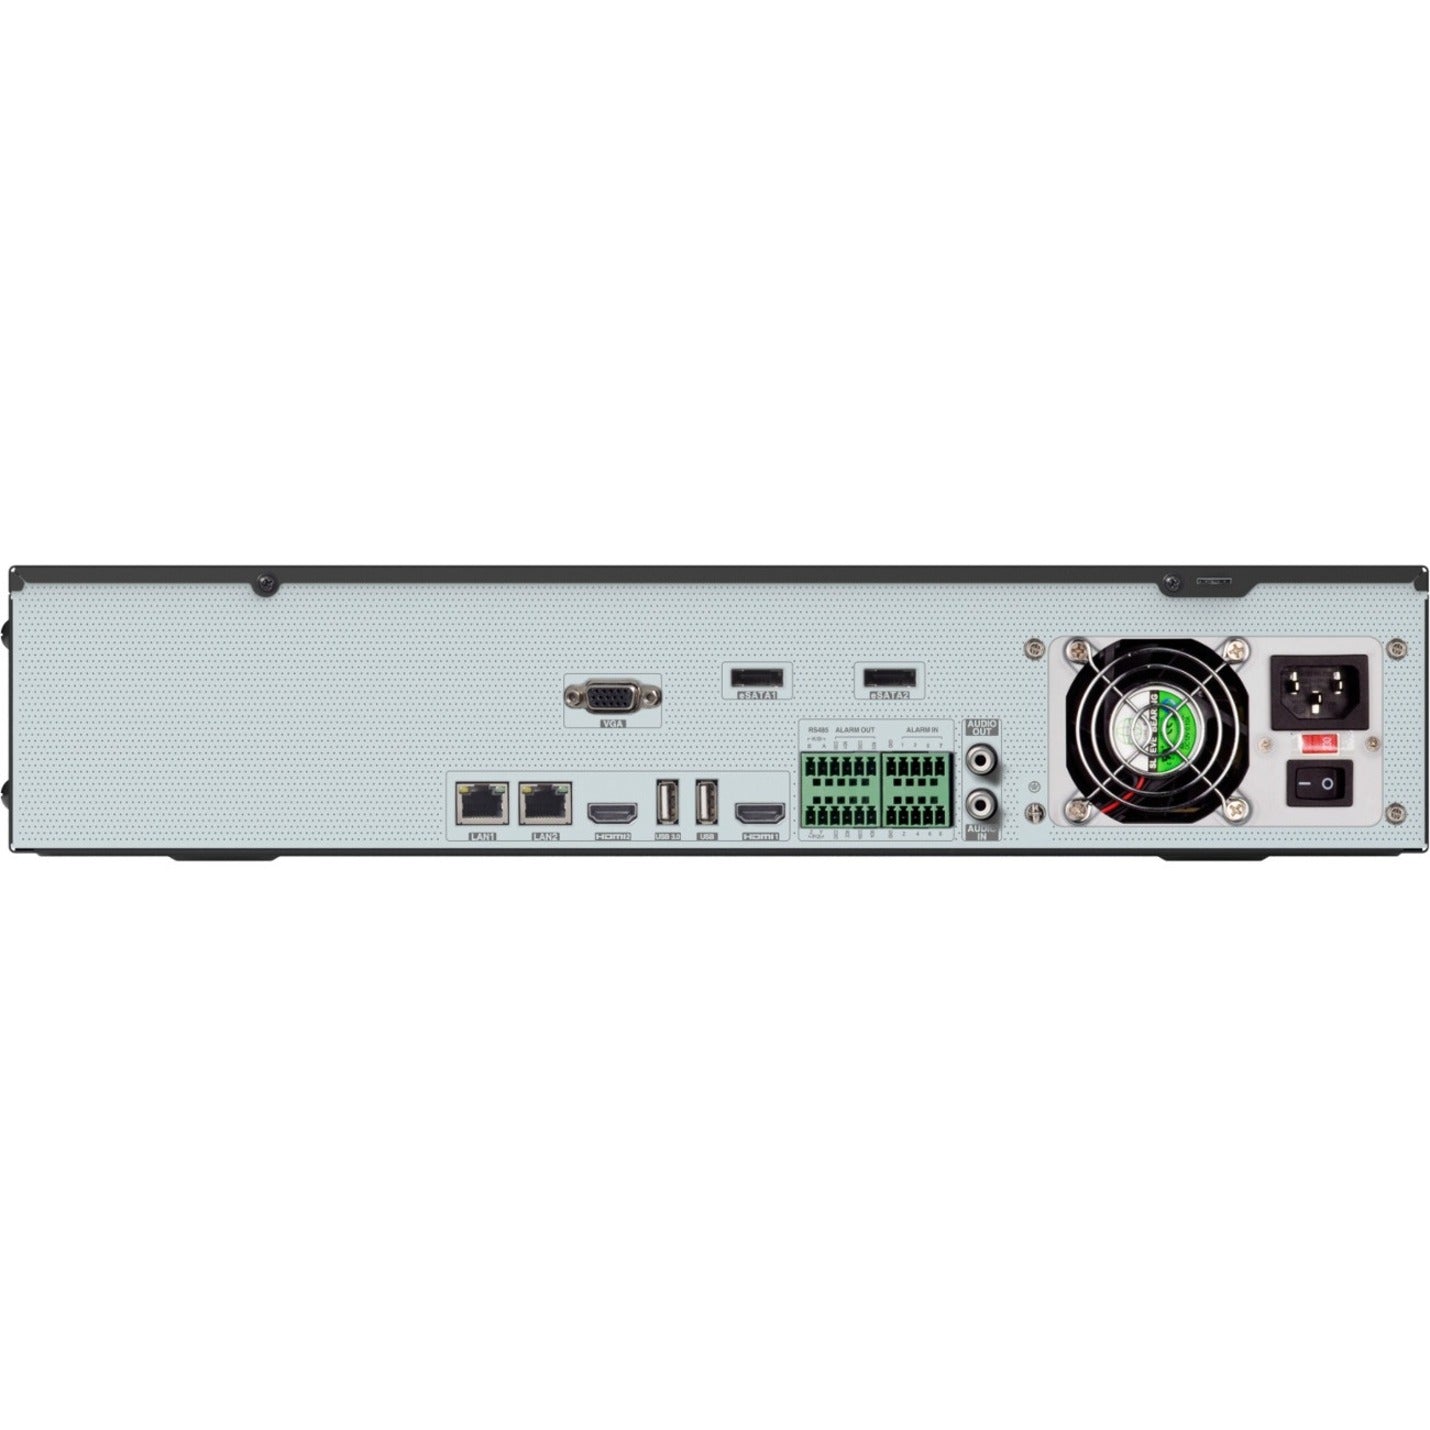 Speco N32NRE12TB 4K H.265 NVR with Facial Recognition and Smart Analytics, 32 Channels, 12TB Hard Drive Capacity